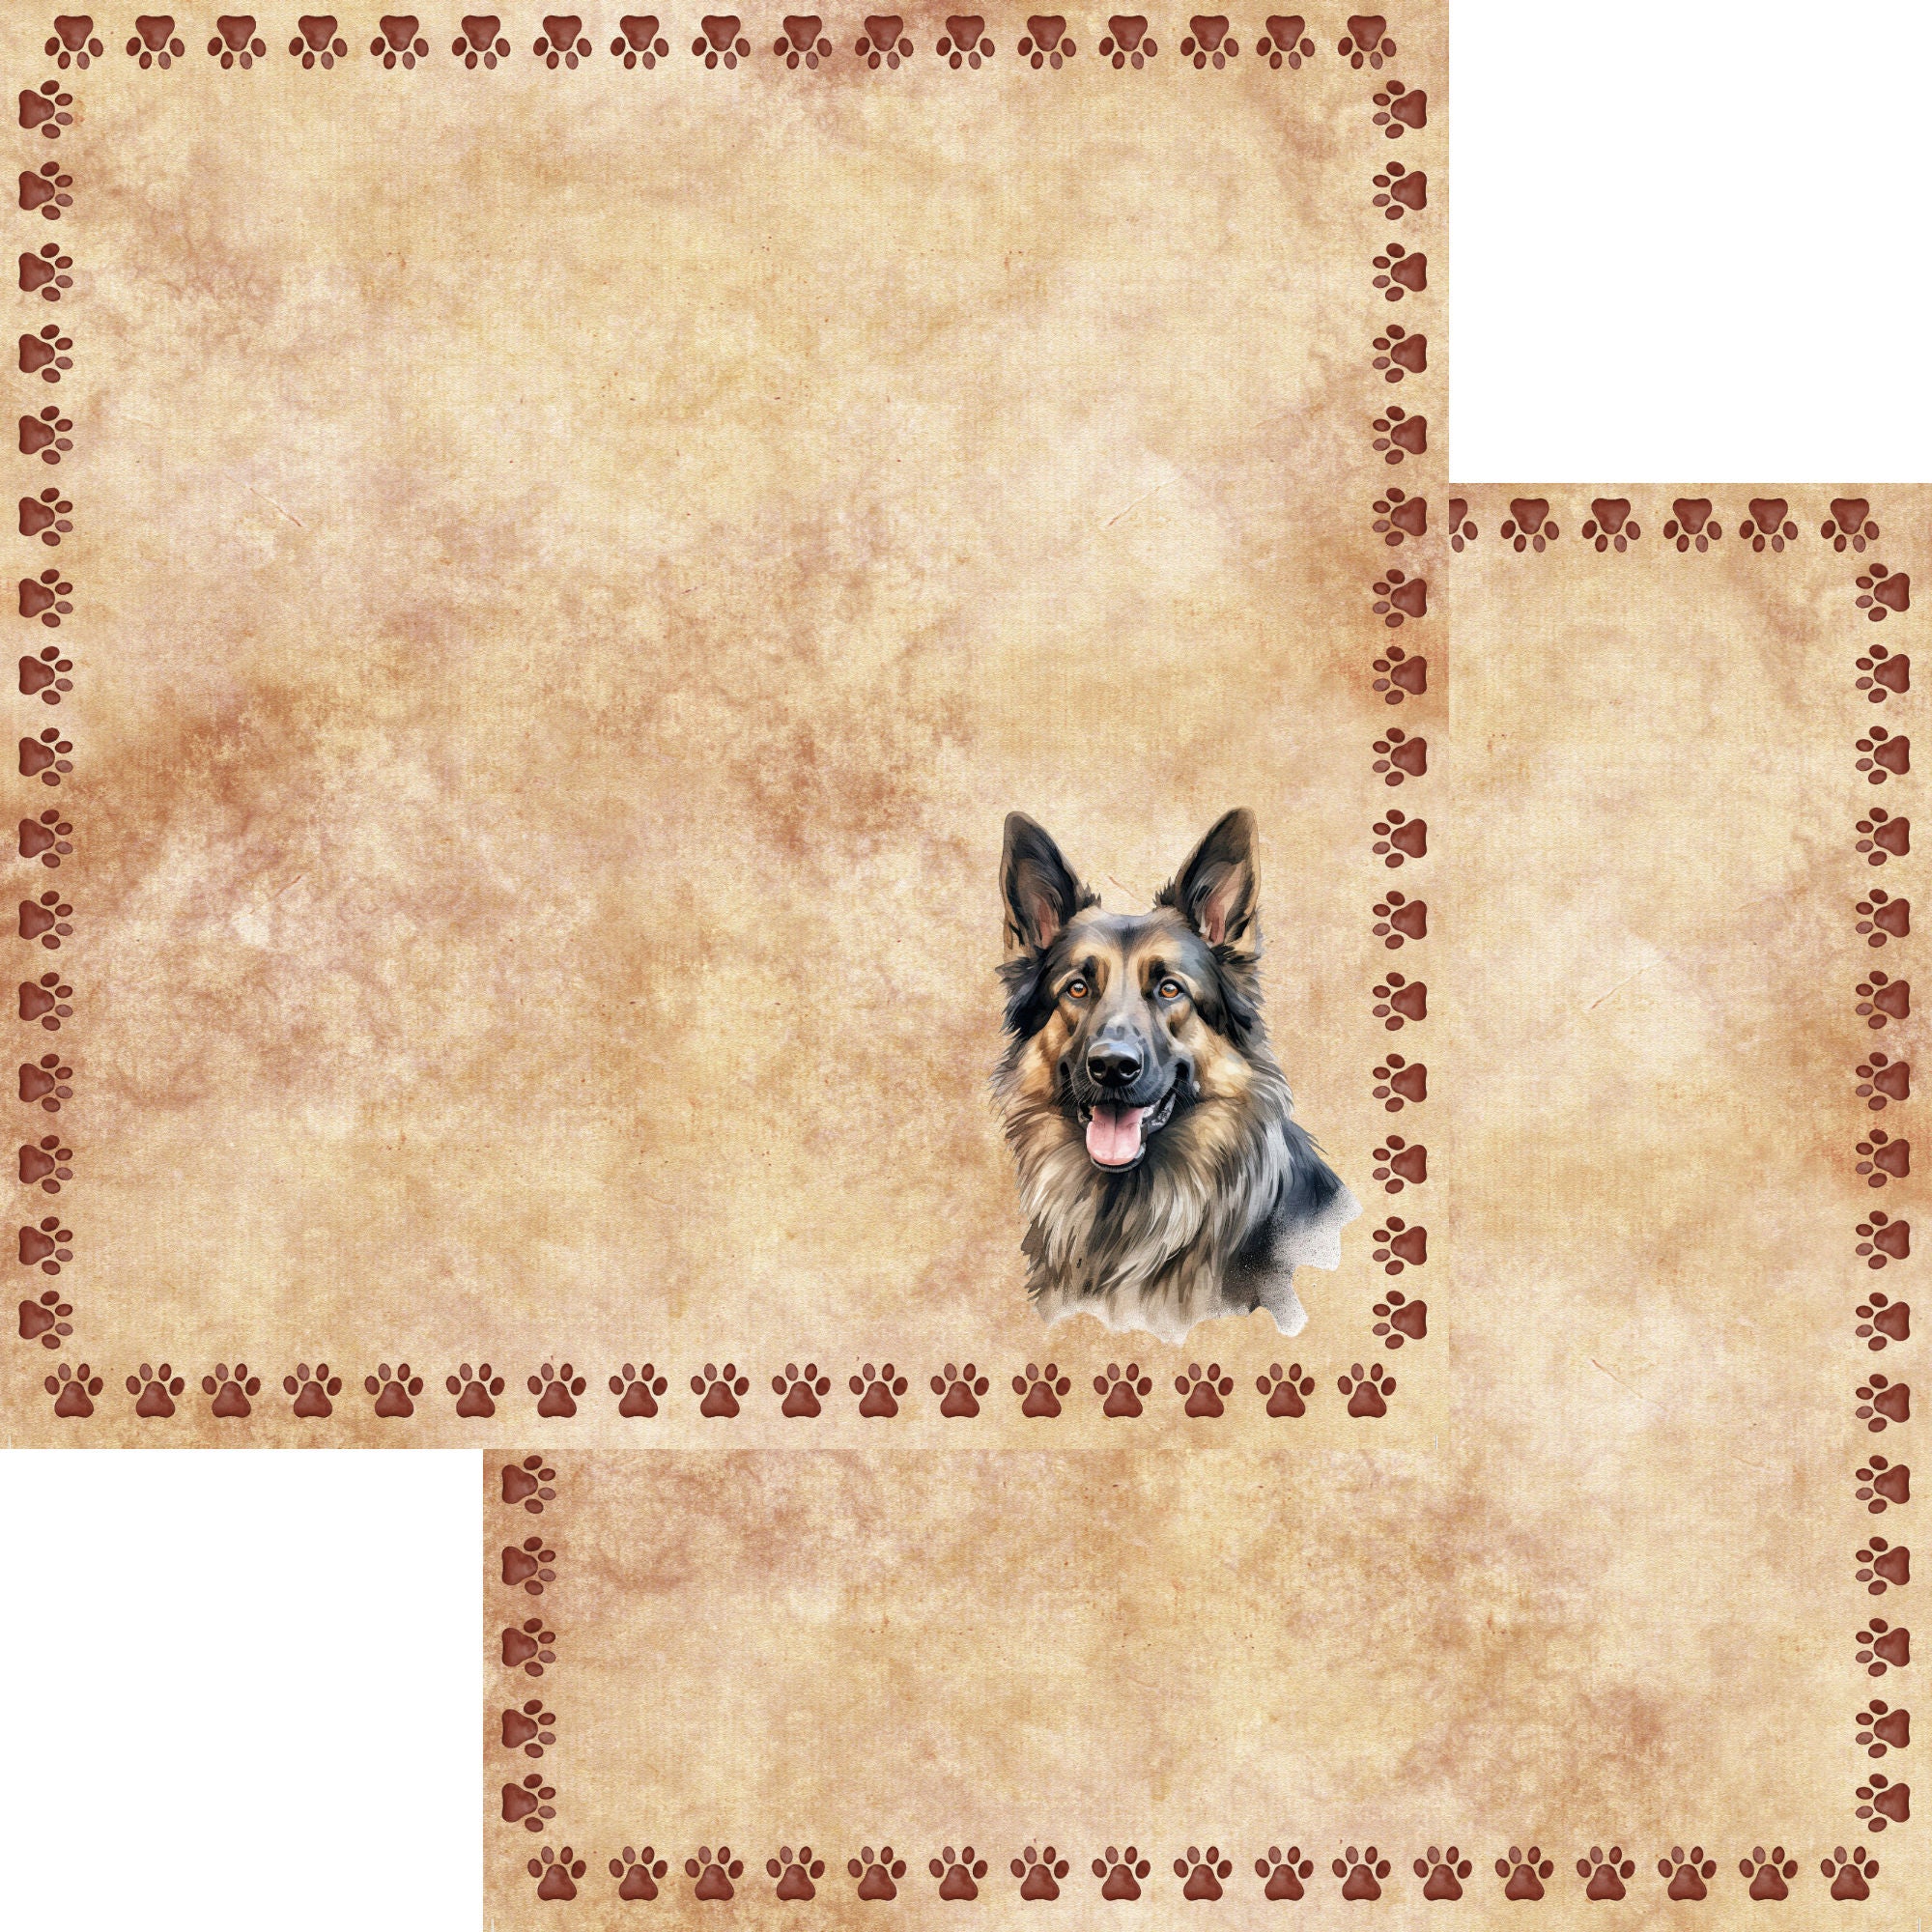 Dog Breeds Collection German Shepherd 2 12 x 12 Double-Sided Scrapbook Paper by SSC Designs